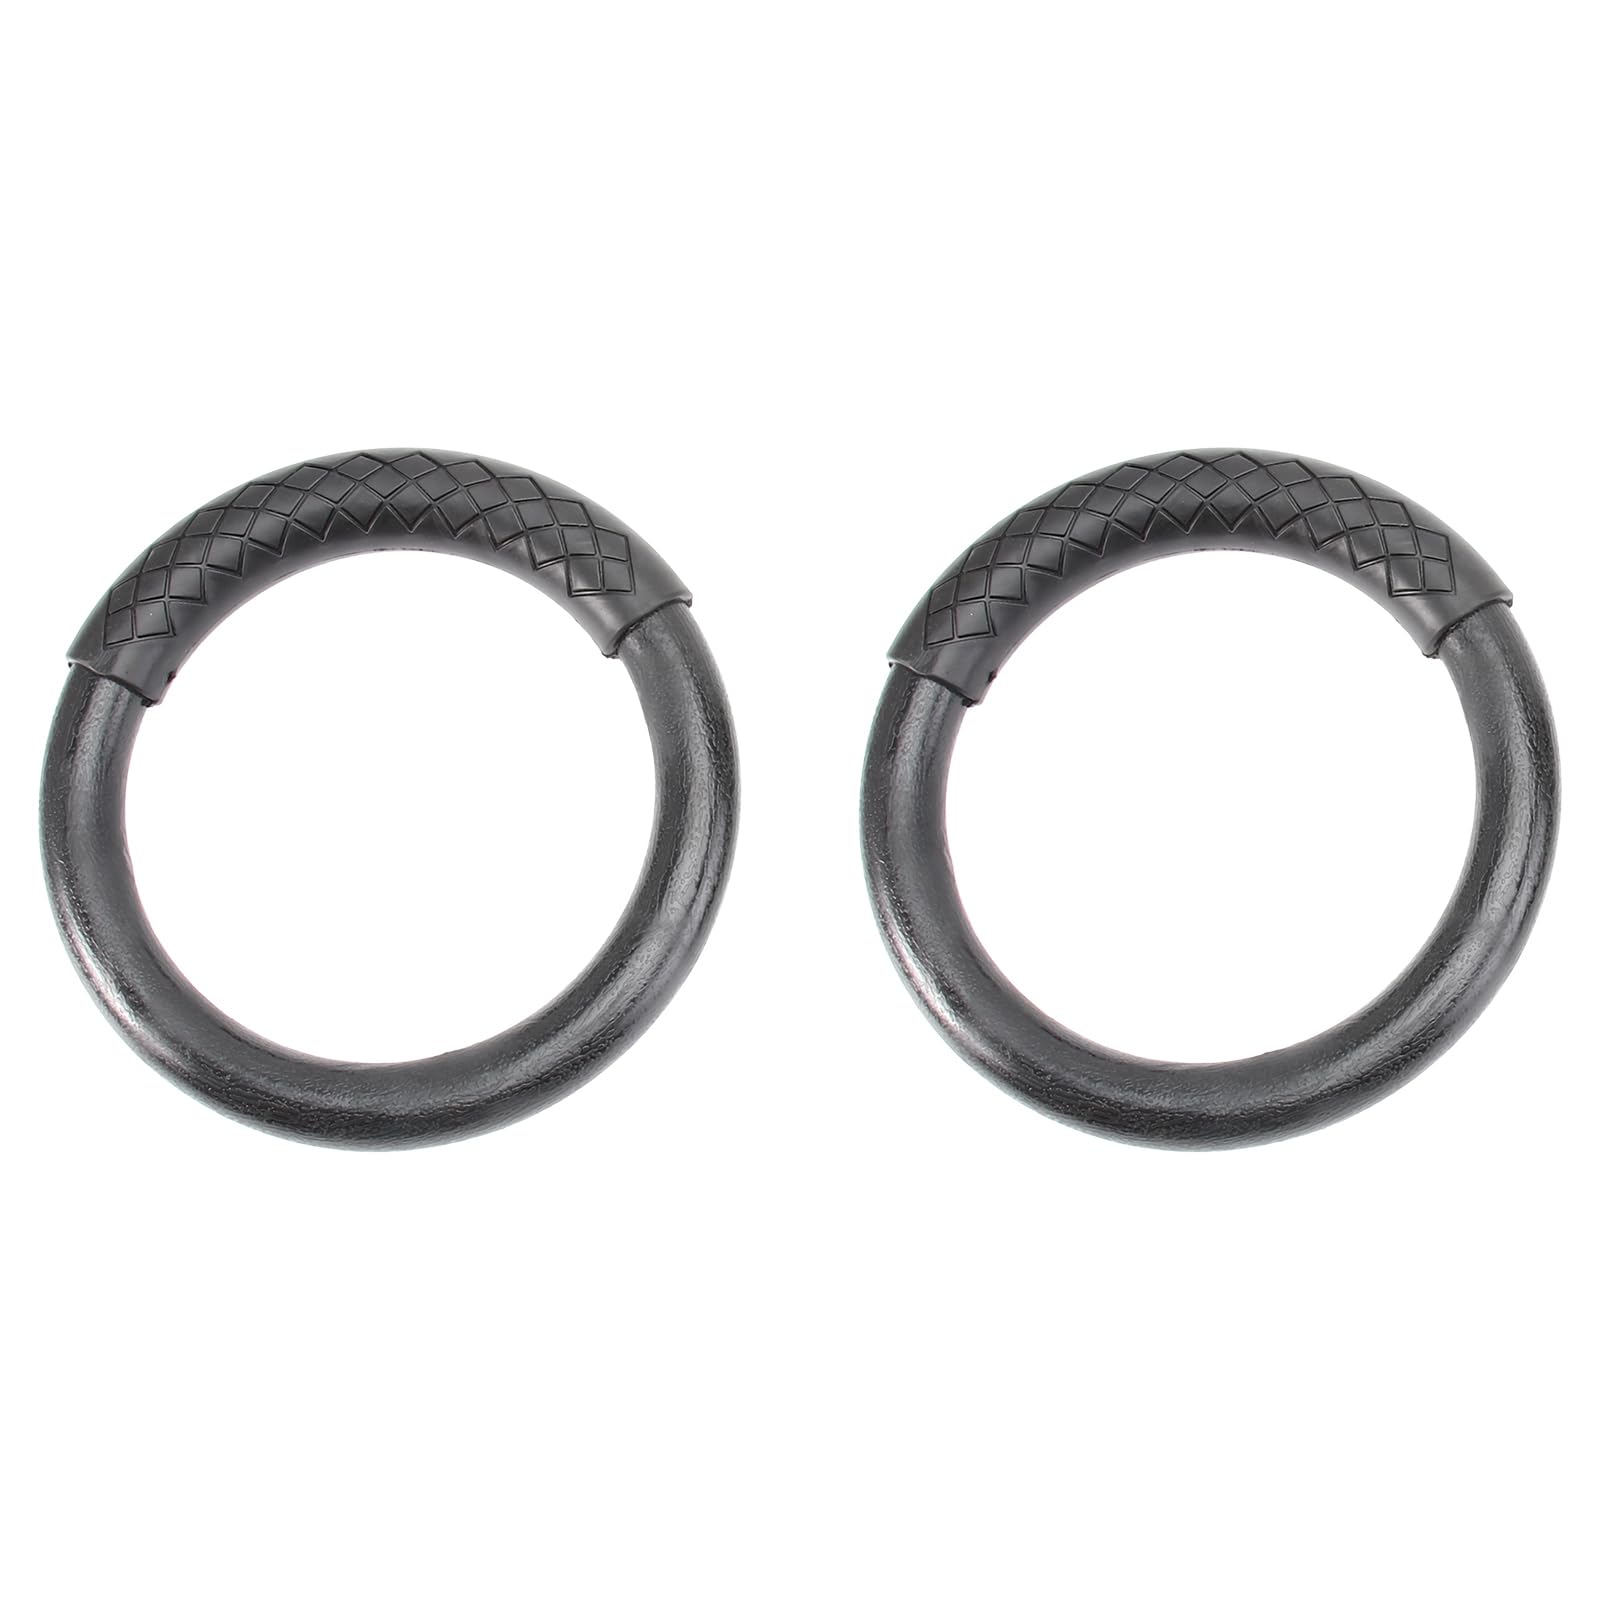 BESPORTBLE 1 Pair ABS Gymnastic Ring Fitness Rings Workouts Ring Home Fitness Ring Pro Gym Ring for Fitness (Black)